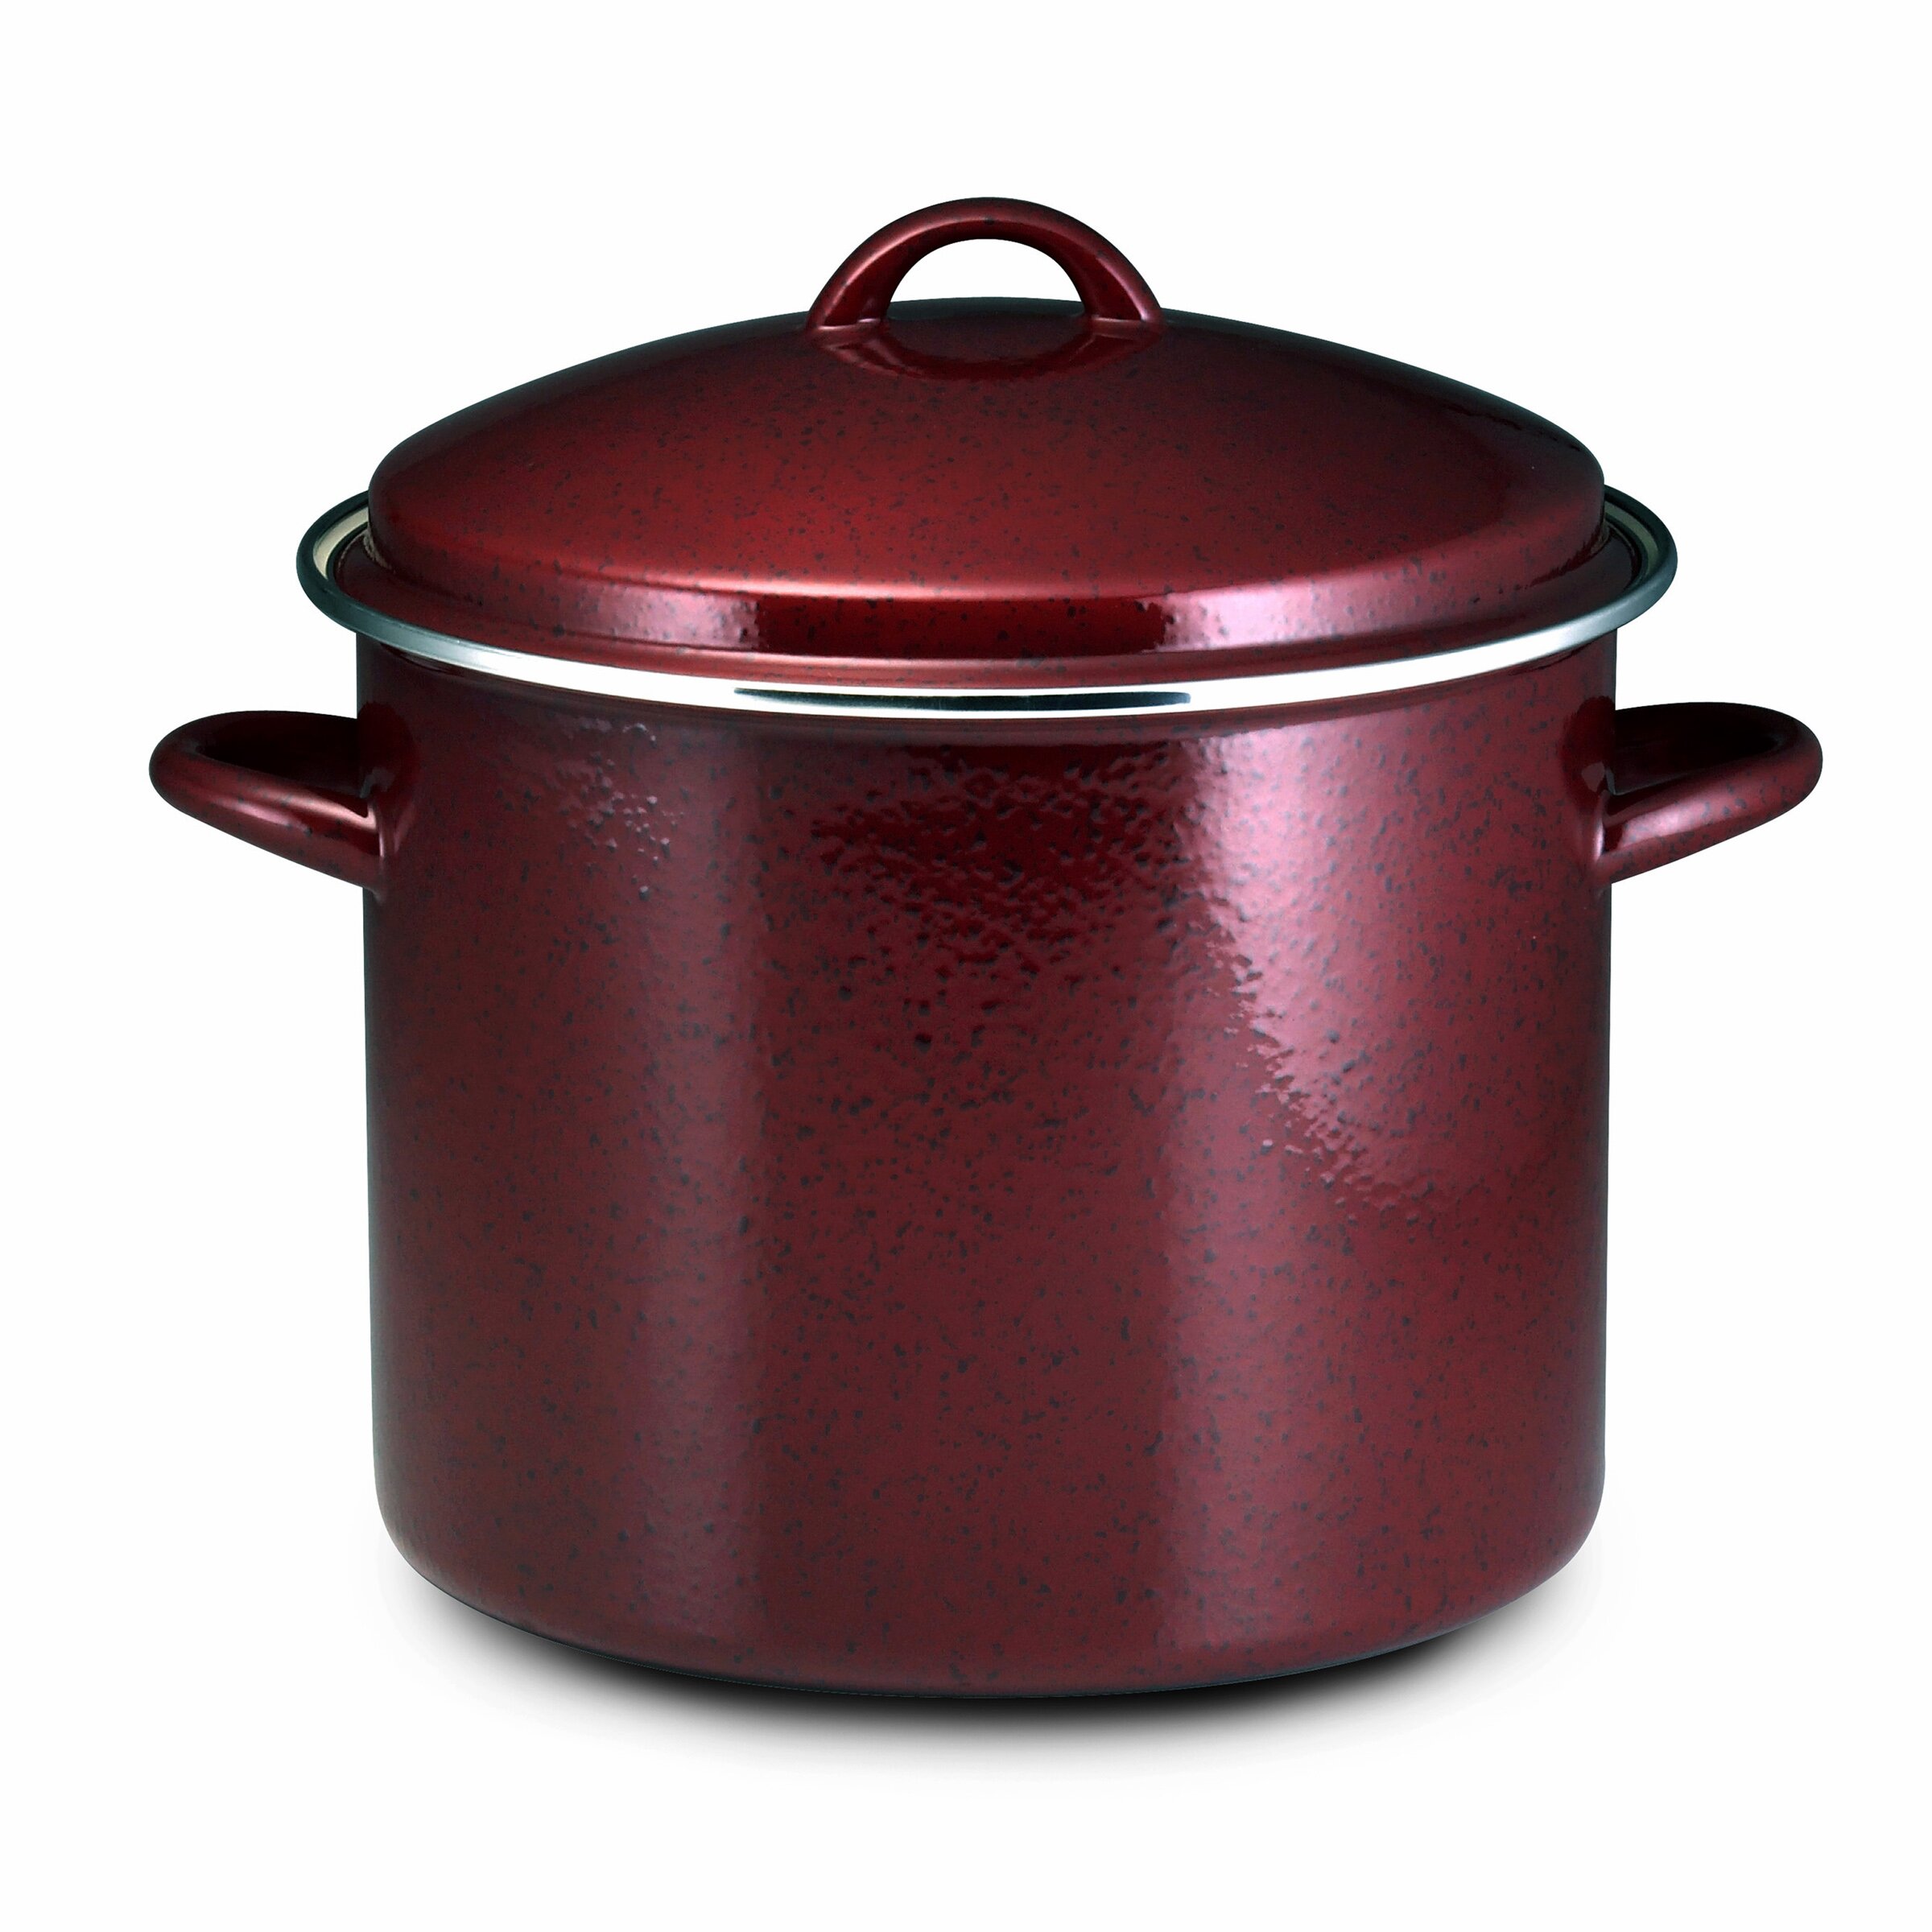 What are the differences between a stock pot and a Dutch oven?